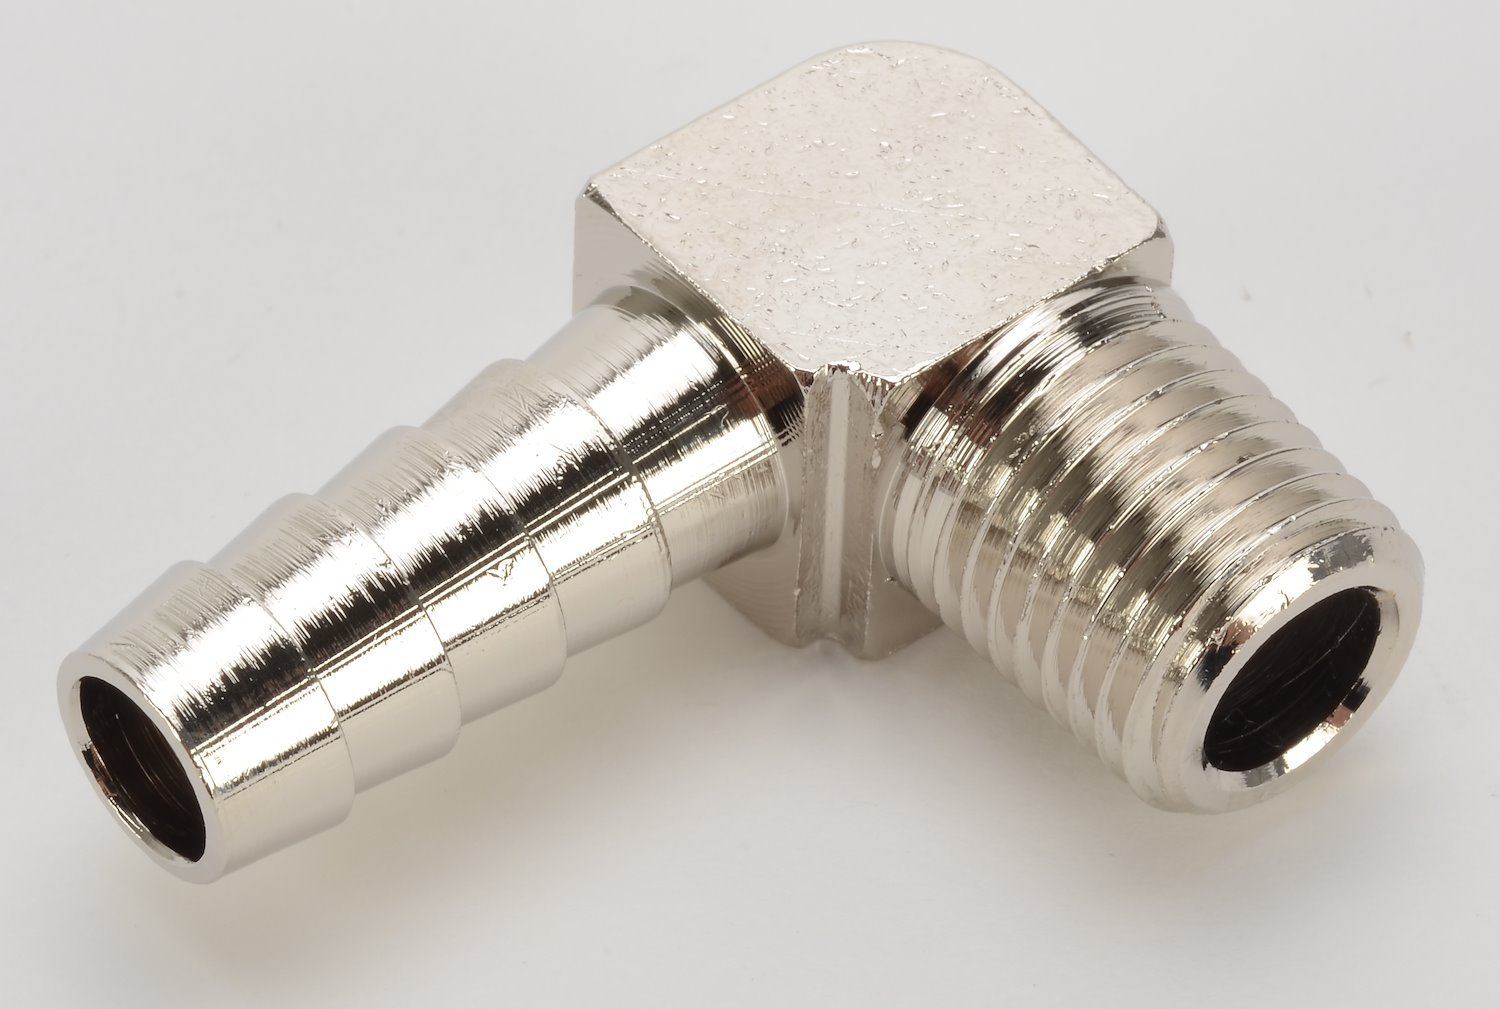 NPT 90-Degree Hose Barb Fitting [1/4 in. NPT to 3/8 in. Hose, Nickel-Plated Brass]